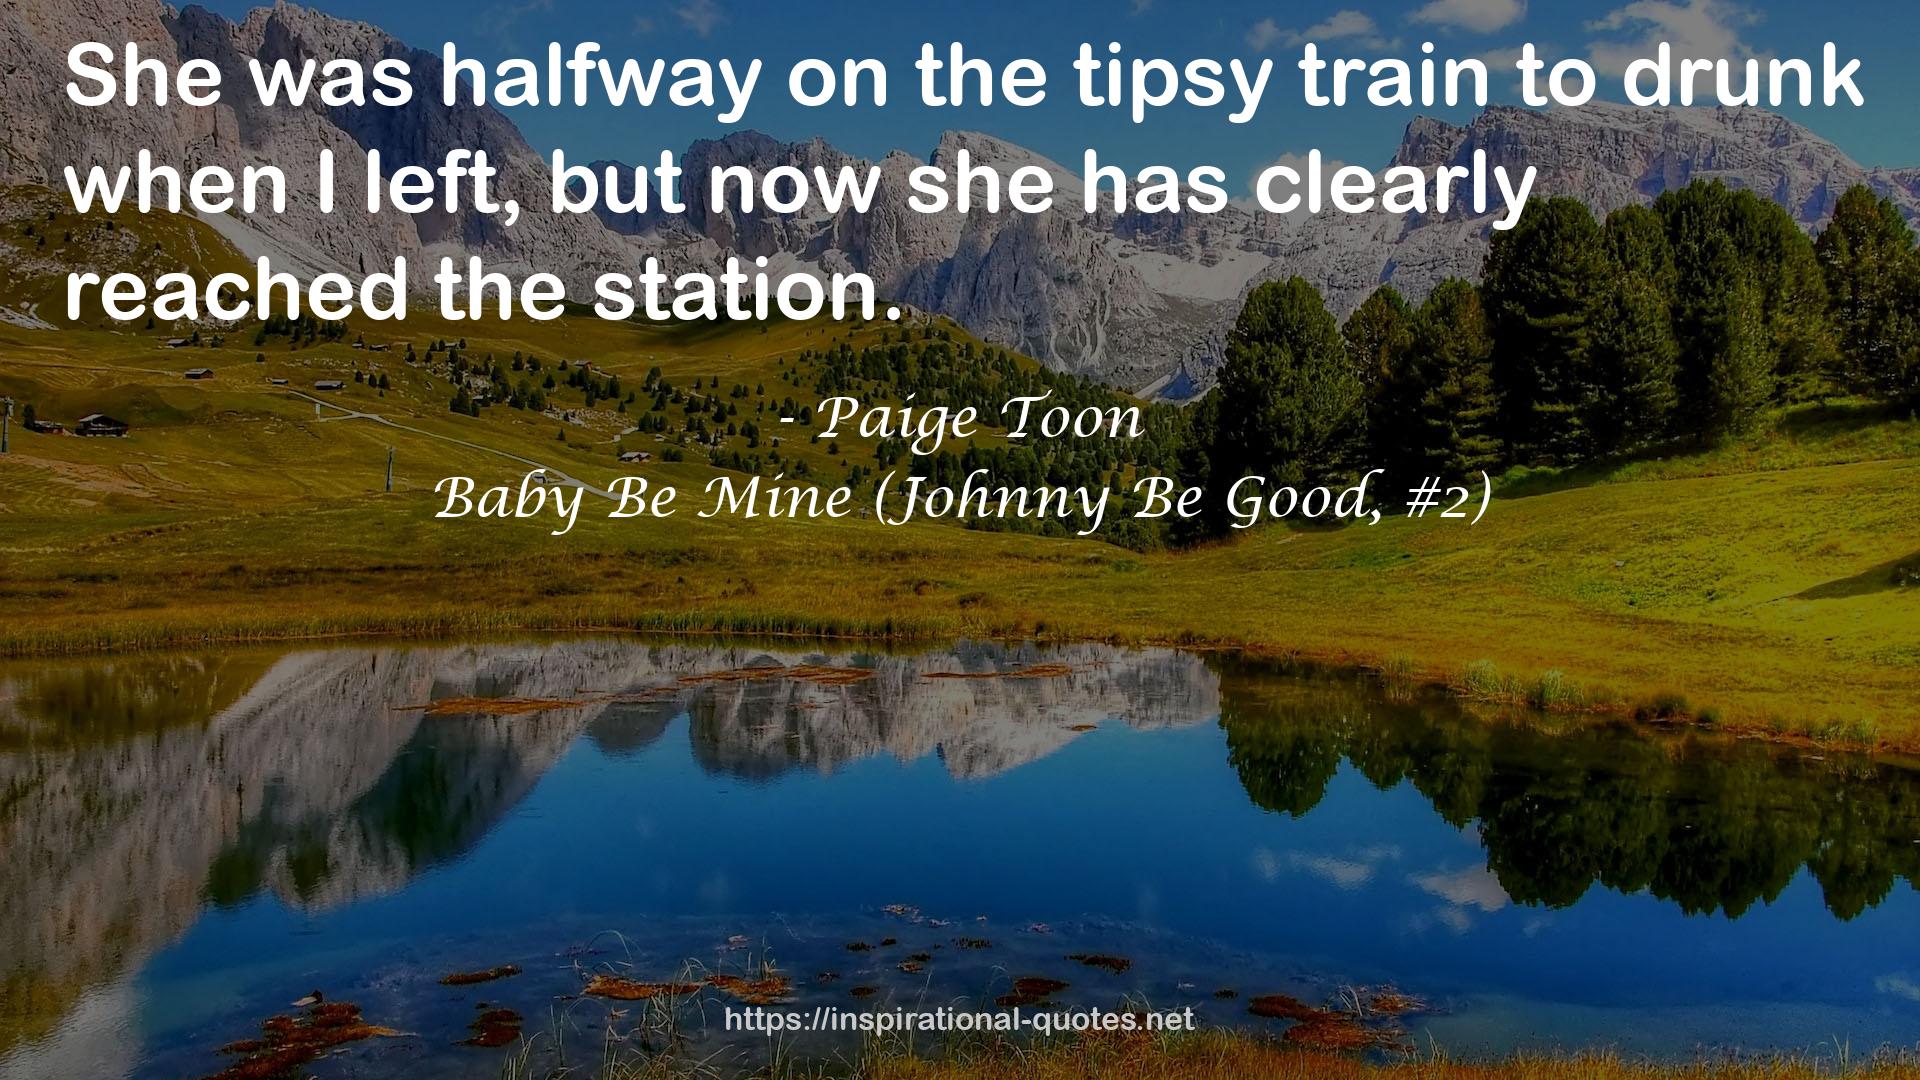 Baby Be Mine (Johnny Be Good, #2) QUOTES